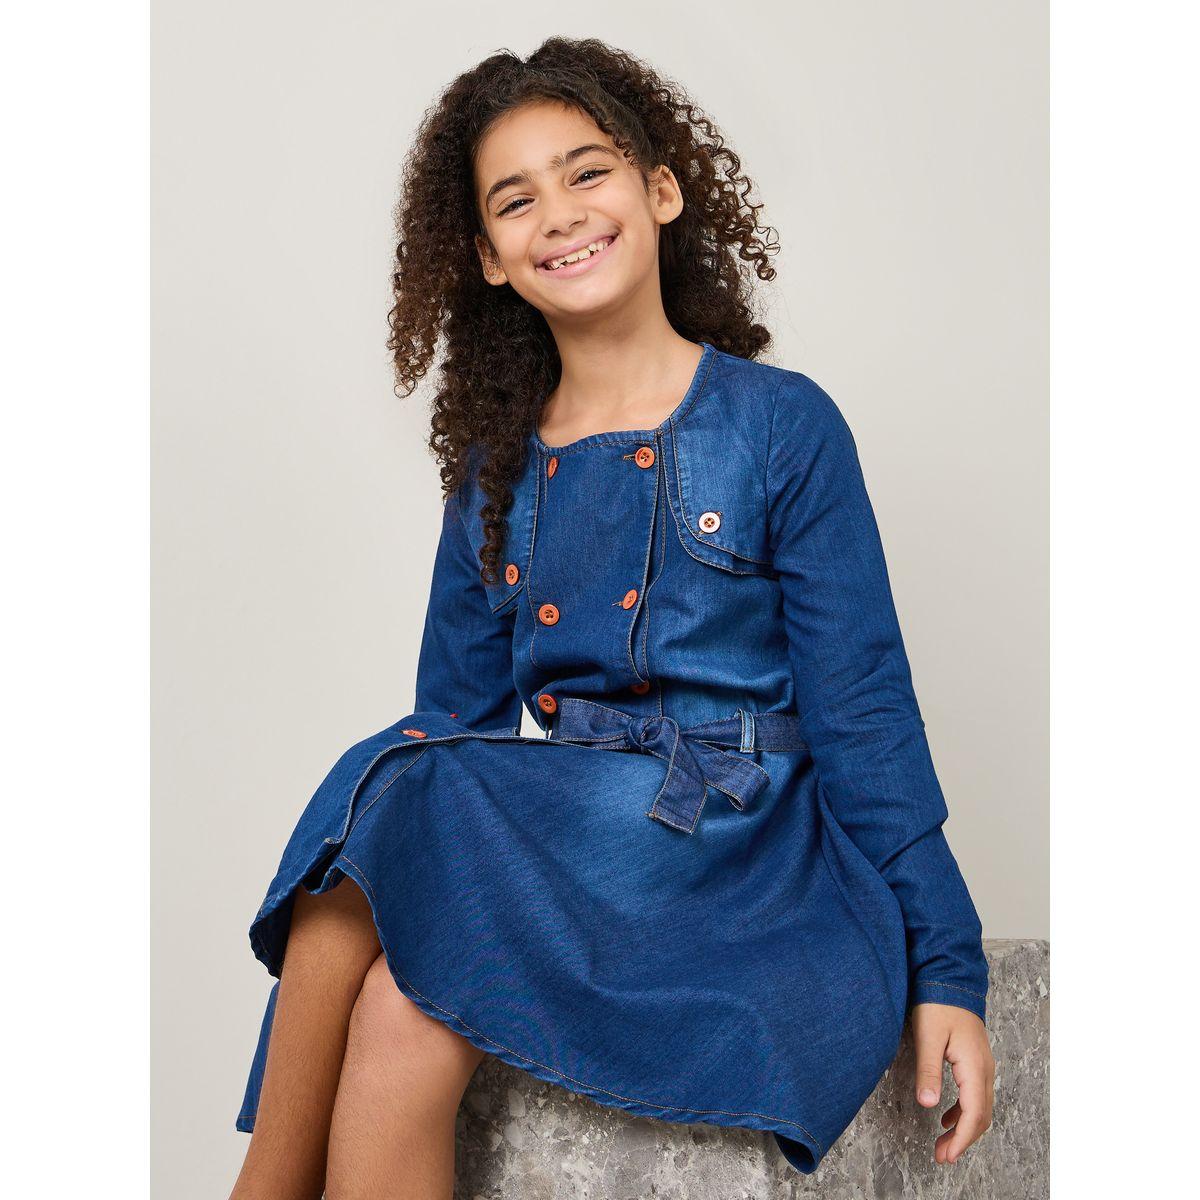 Soft Denim Long Sleeve Denim Dress For Girls | Sizes 4 10 | Casual Clothing  For Spring And Autumn | Ideal For Teens | Kids Clothes | Item #6 8 0 From  Sansejinba, $21.48 | DHgate.Com